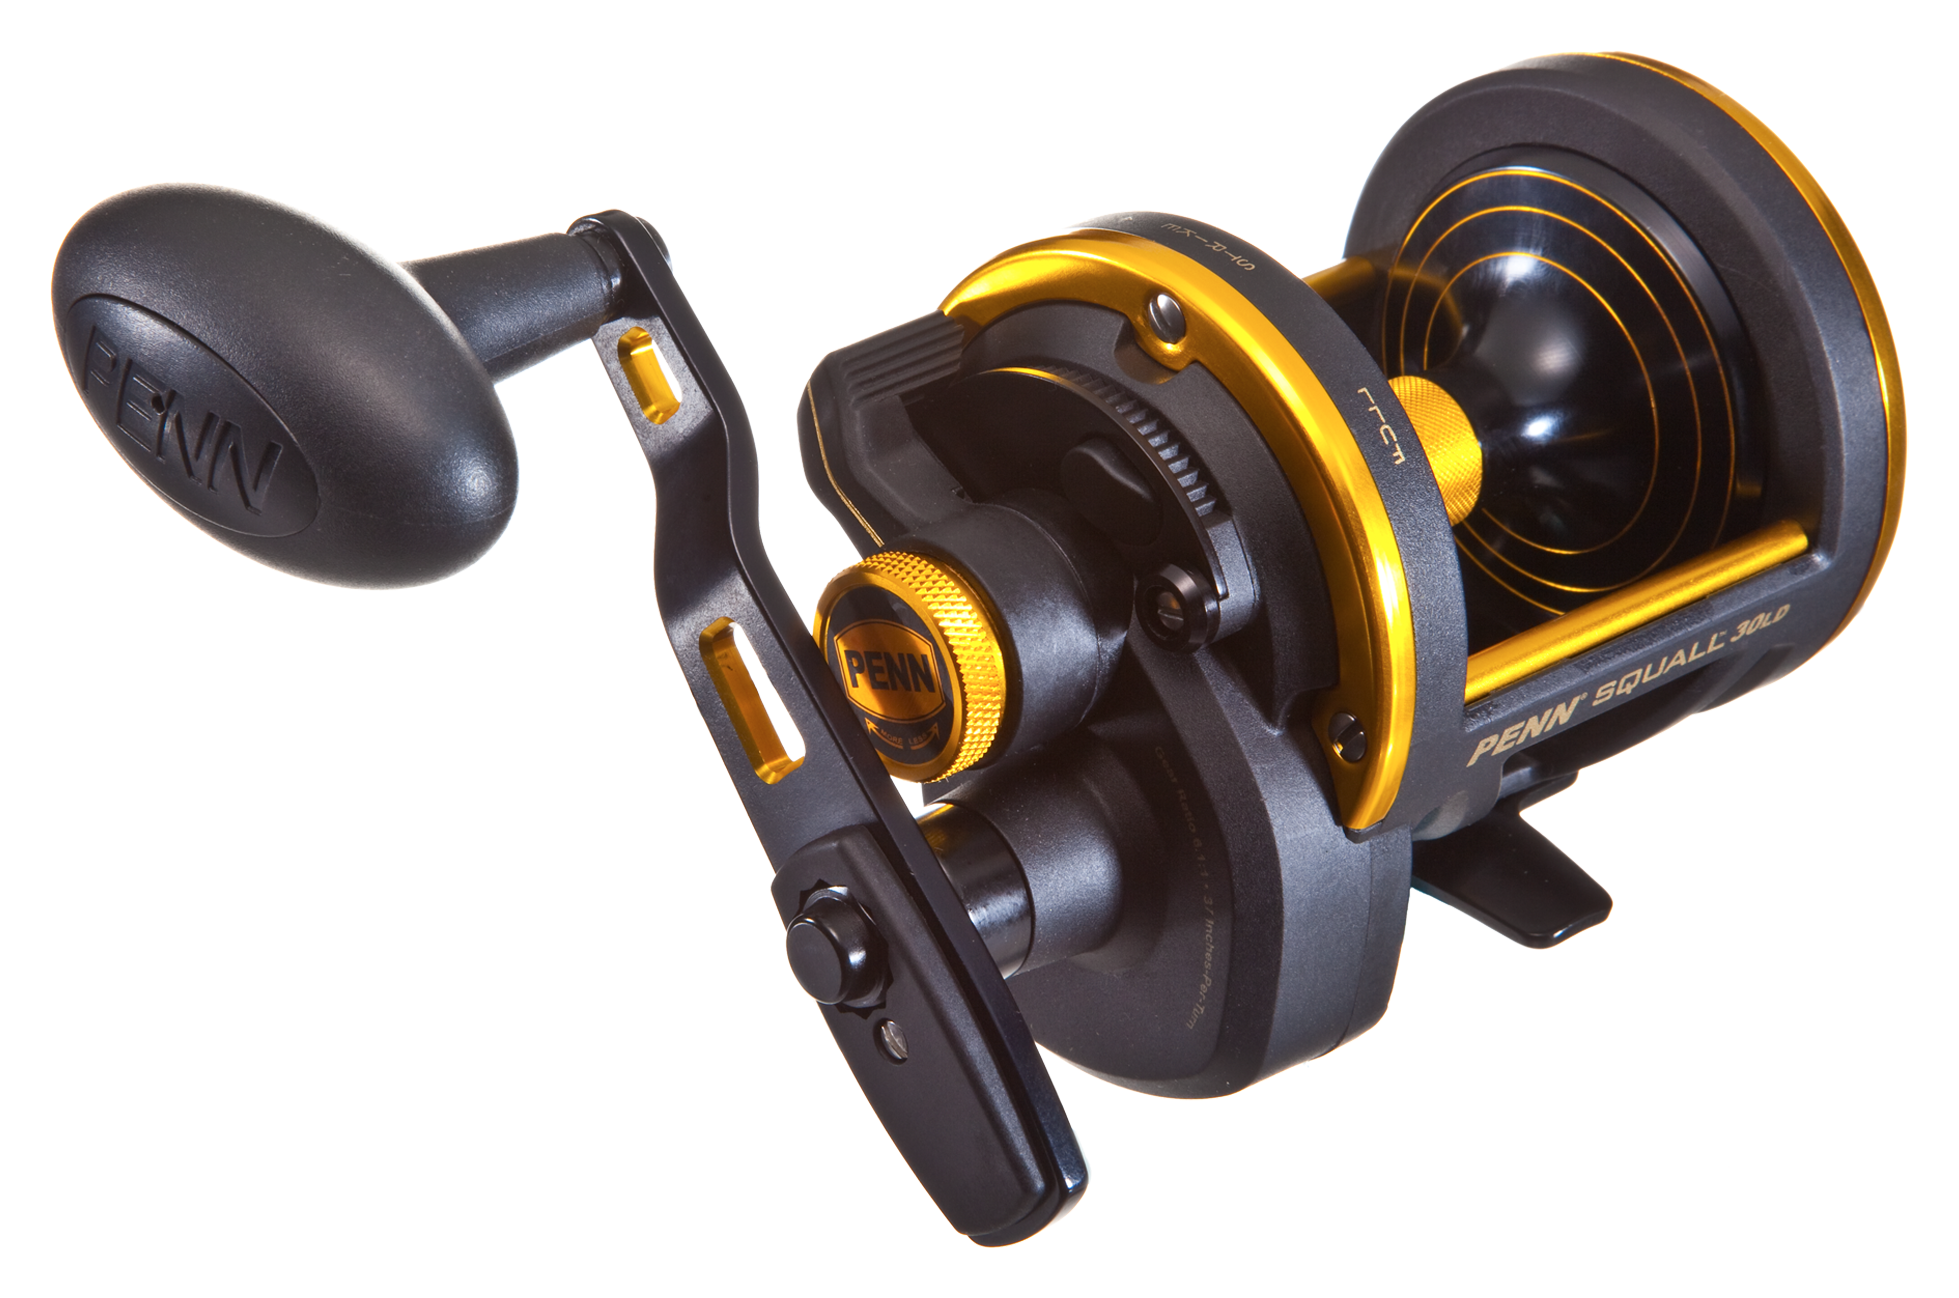 Squall Lever Drag 2 Speed Black Gold 47 oz, Offshore Reels -  Canada